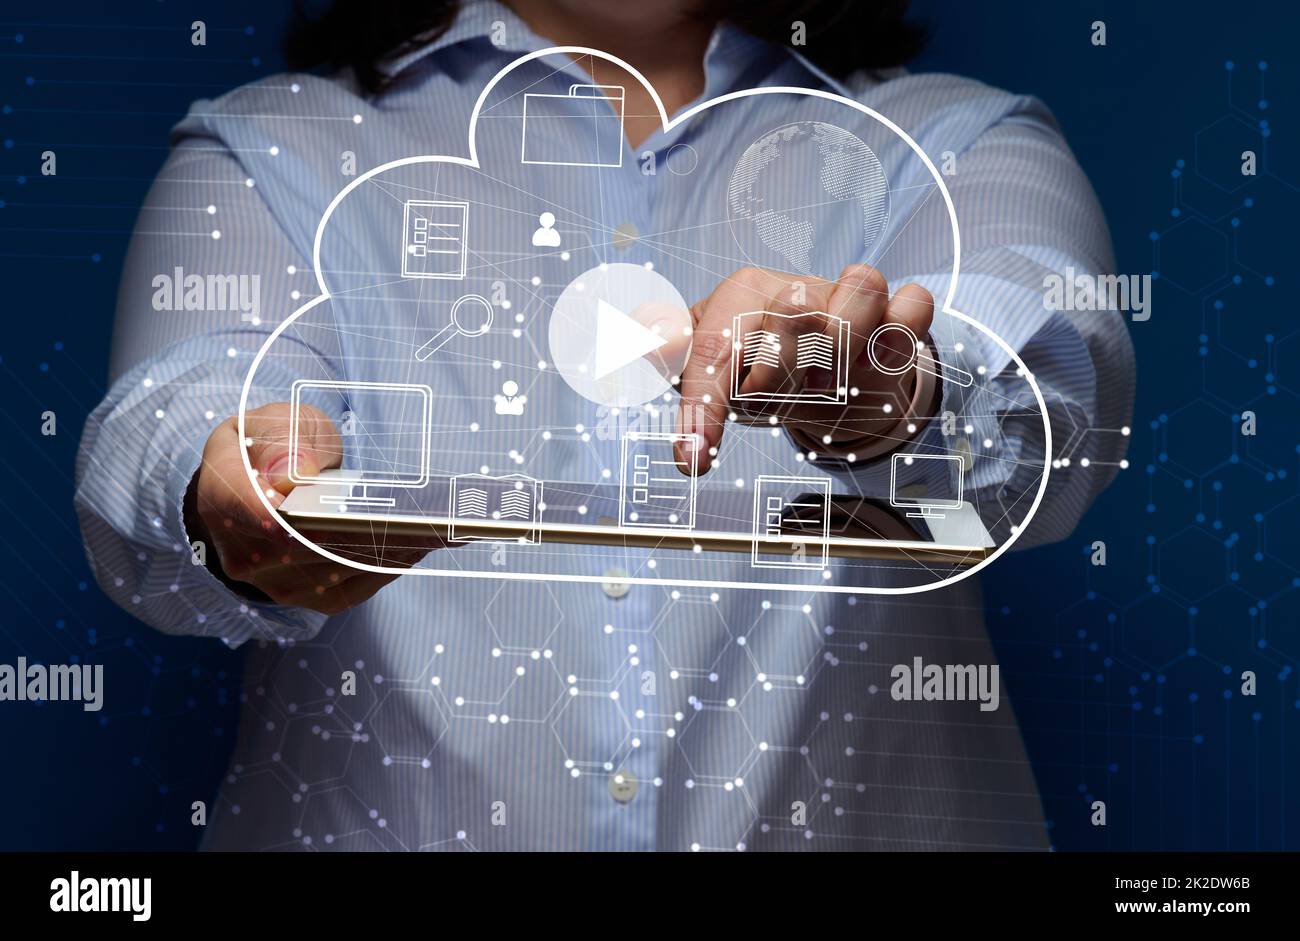 Cloud data storage and a woman holding an electronic tablet. Information exchange and secure data storage. Cloud server and high technology Stock Photo